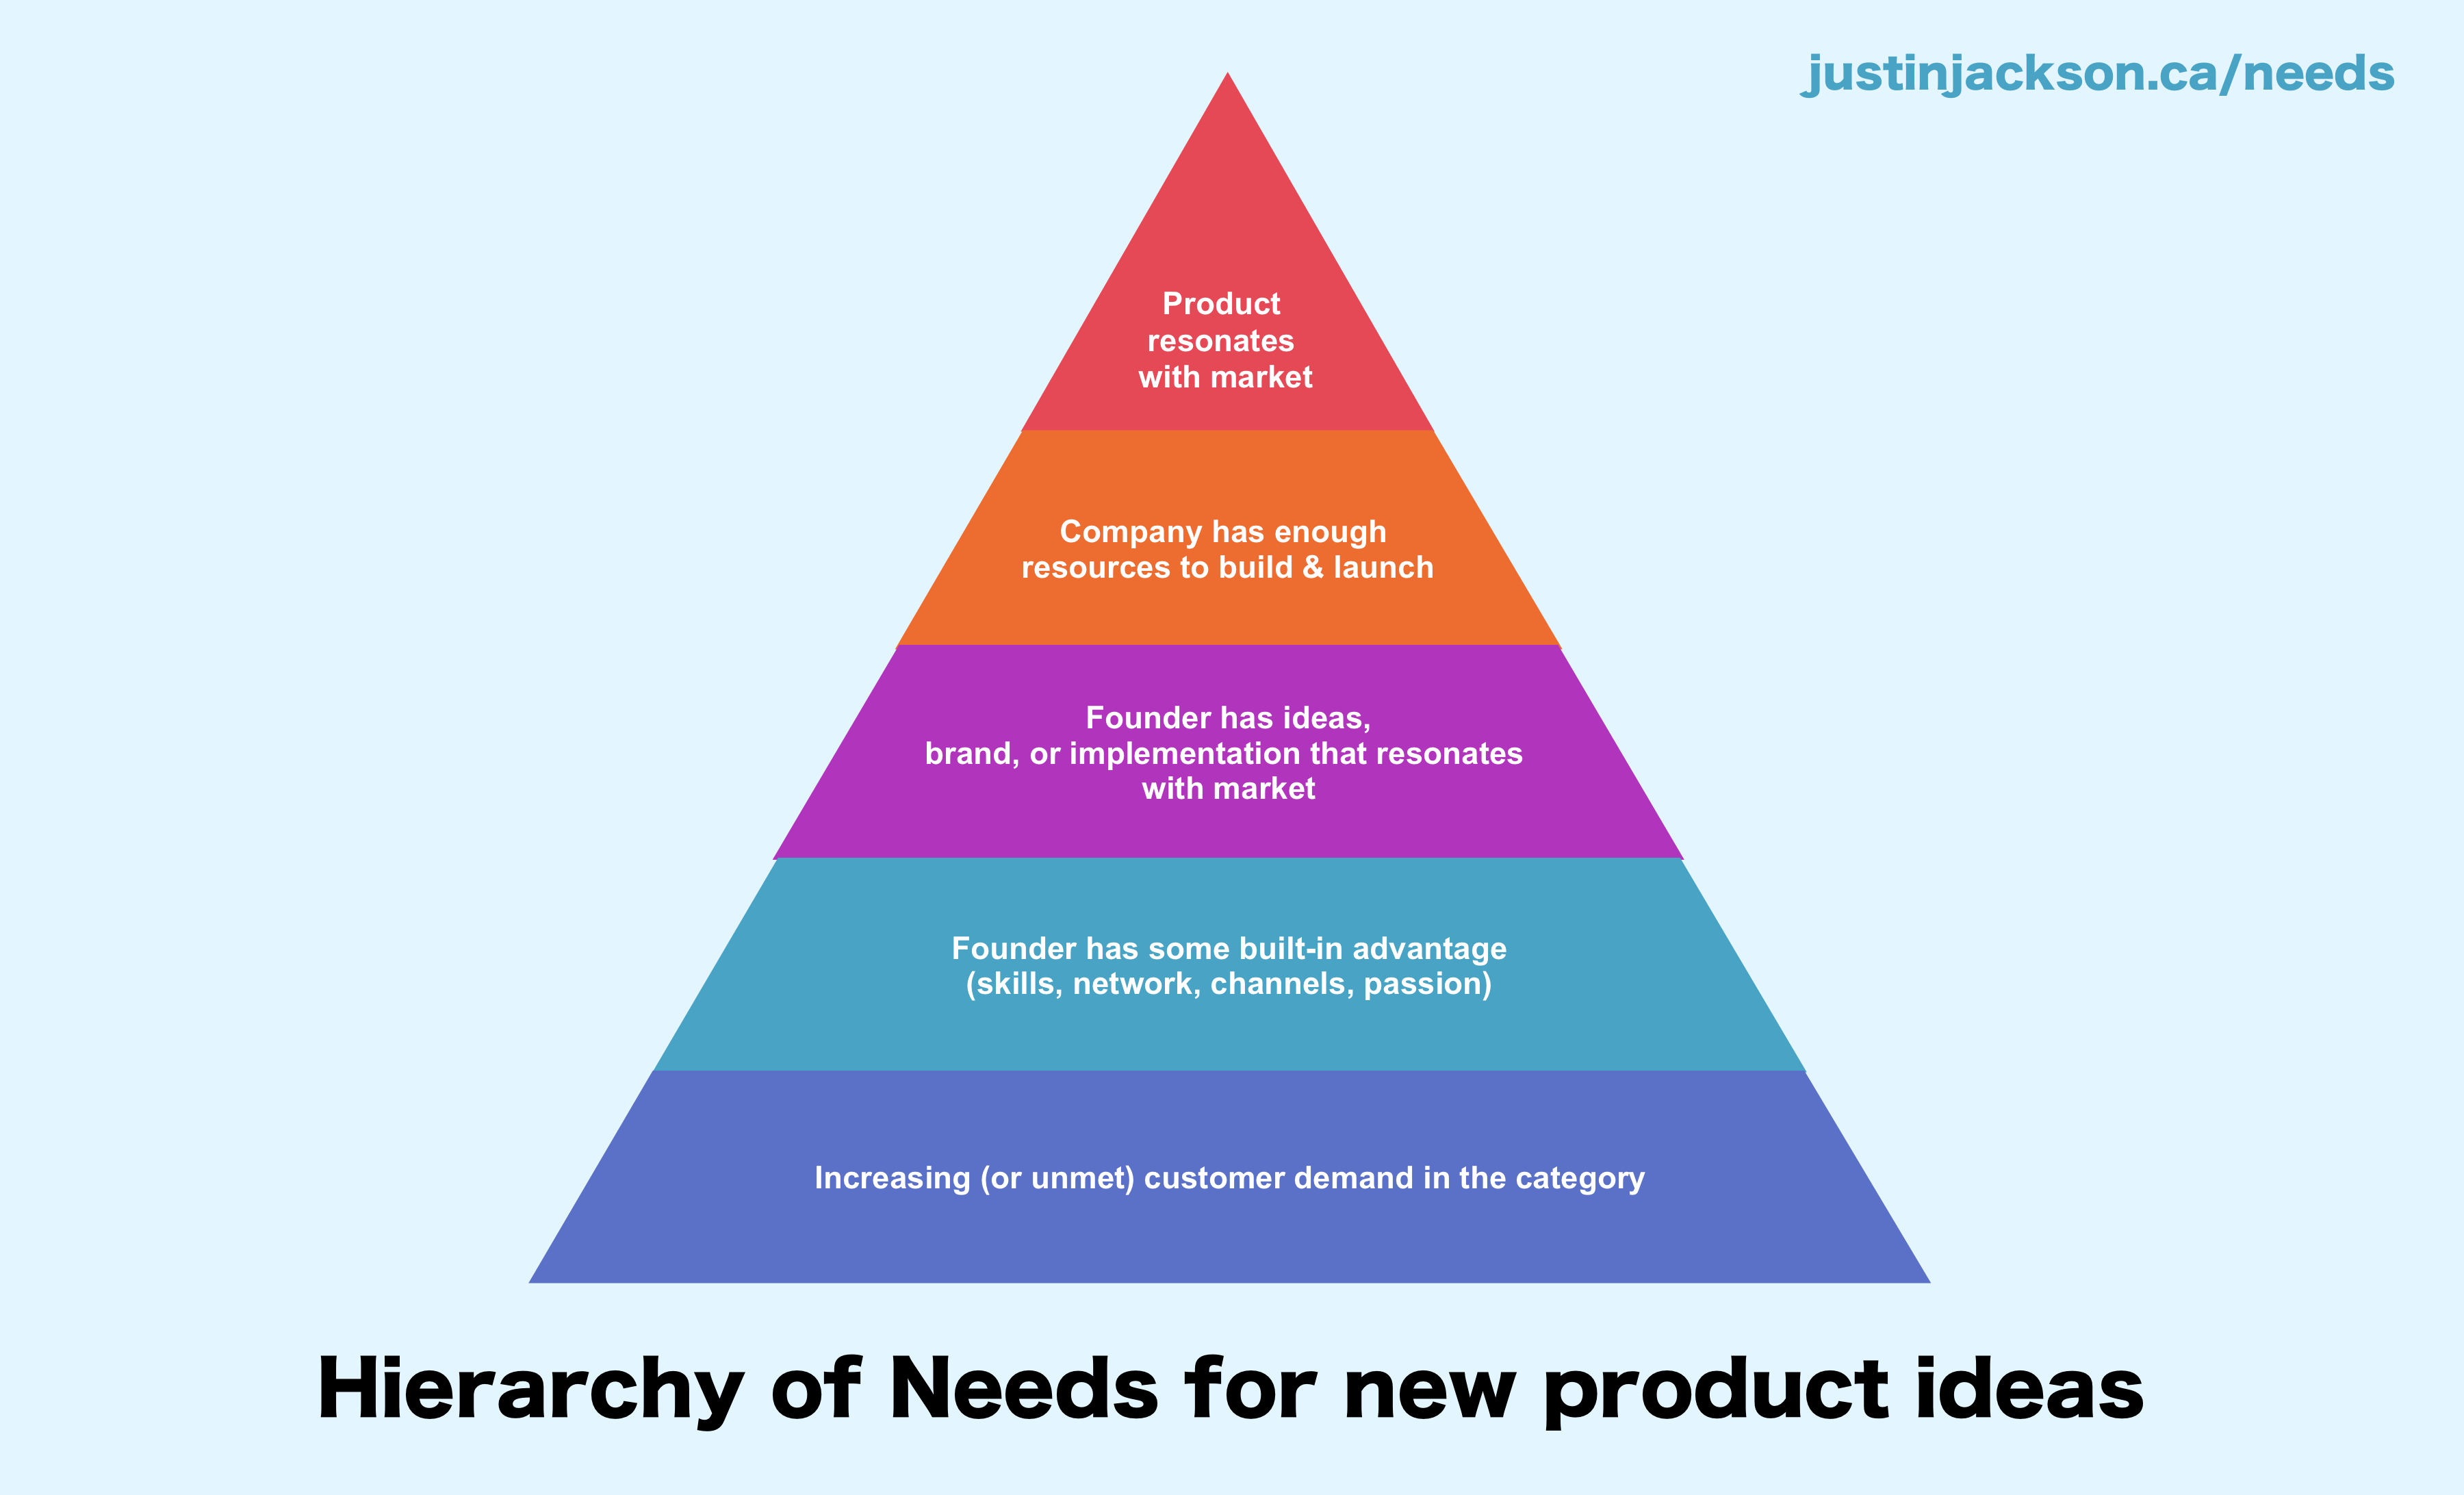 /assets/content/hierarchy-of-needs-for-new-product-ideas-justin-jackson.png